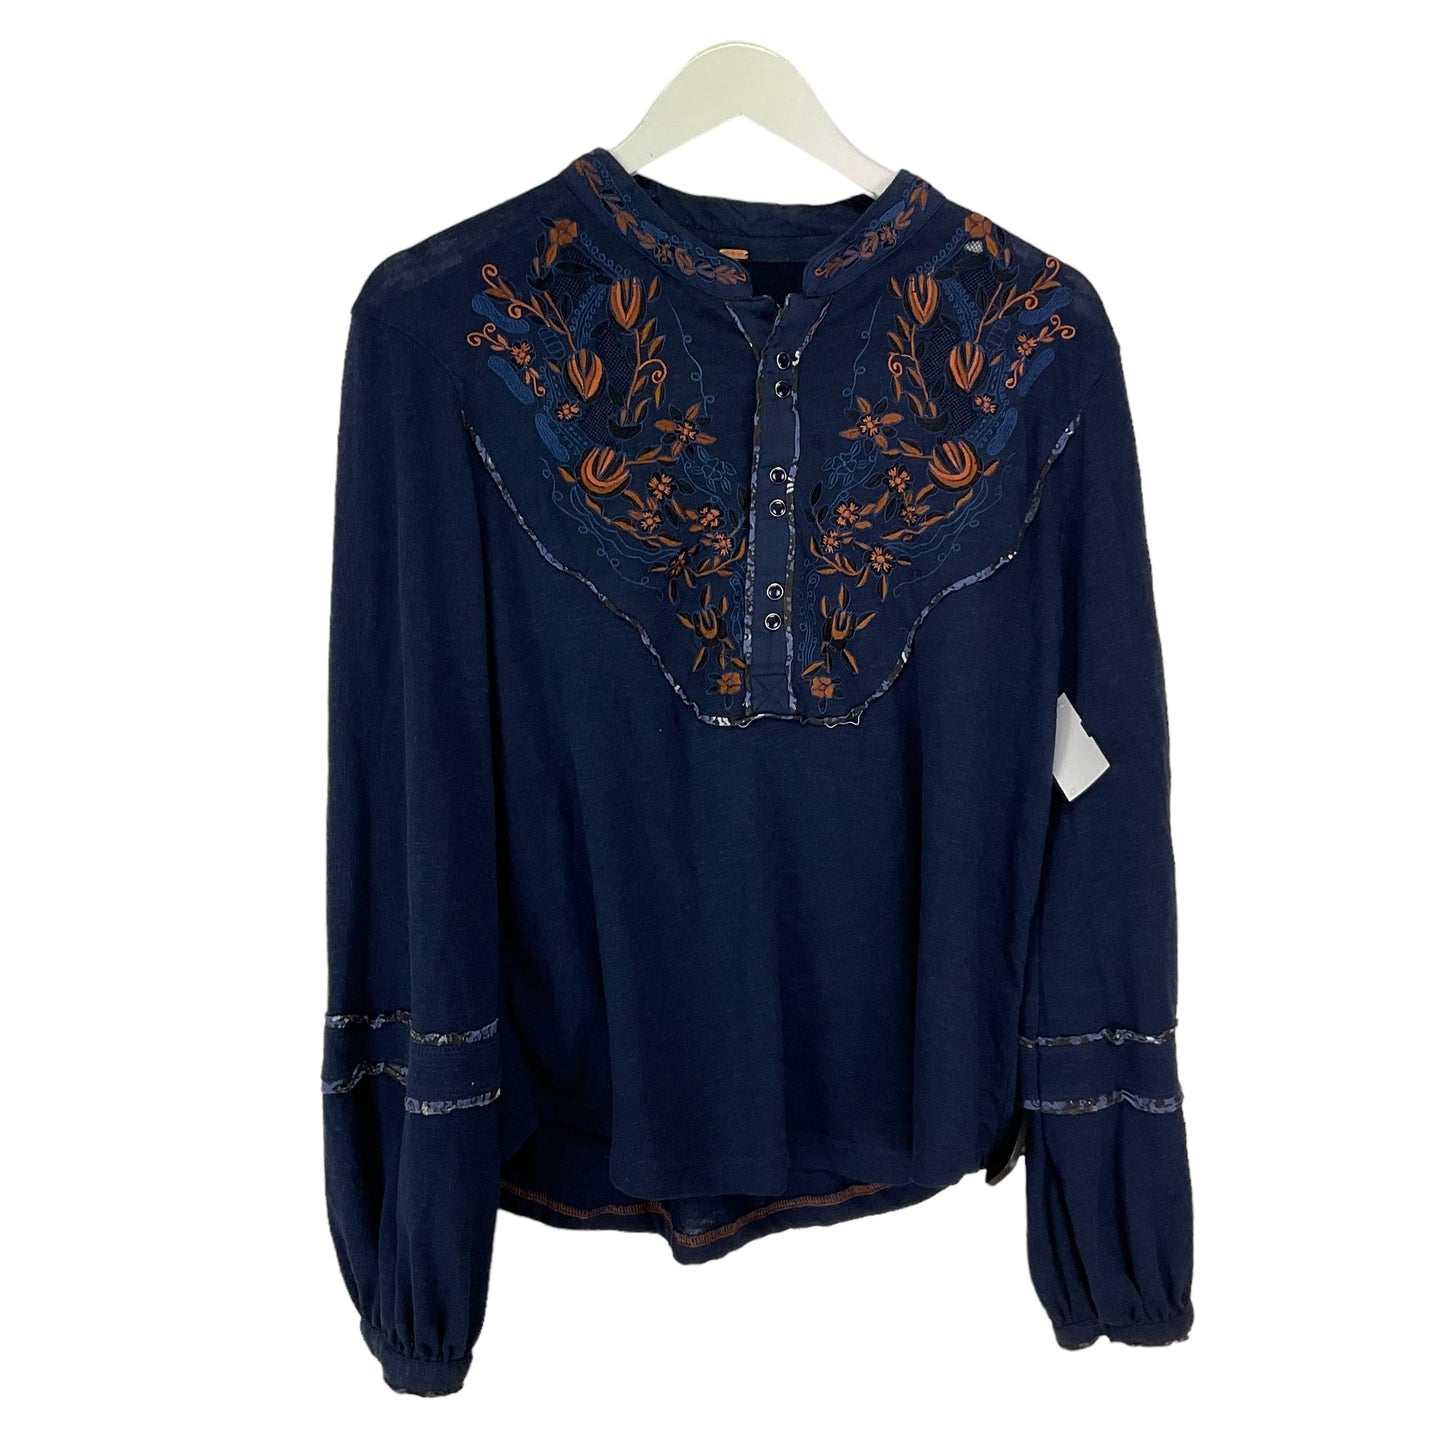 Navy Top Long Sleeve Free People, Size M